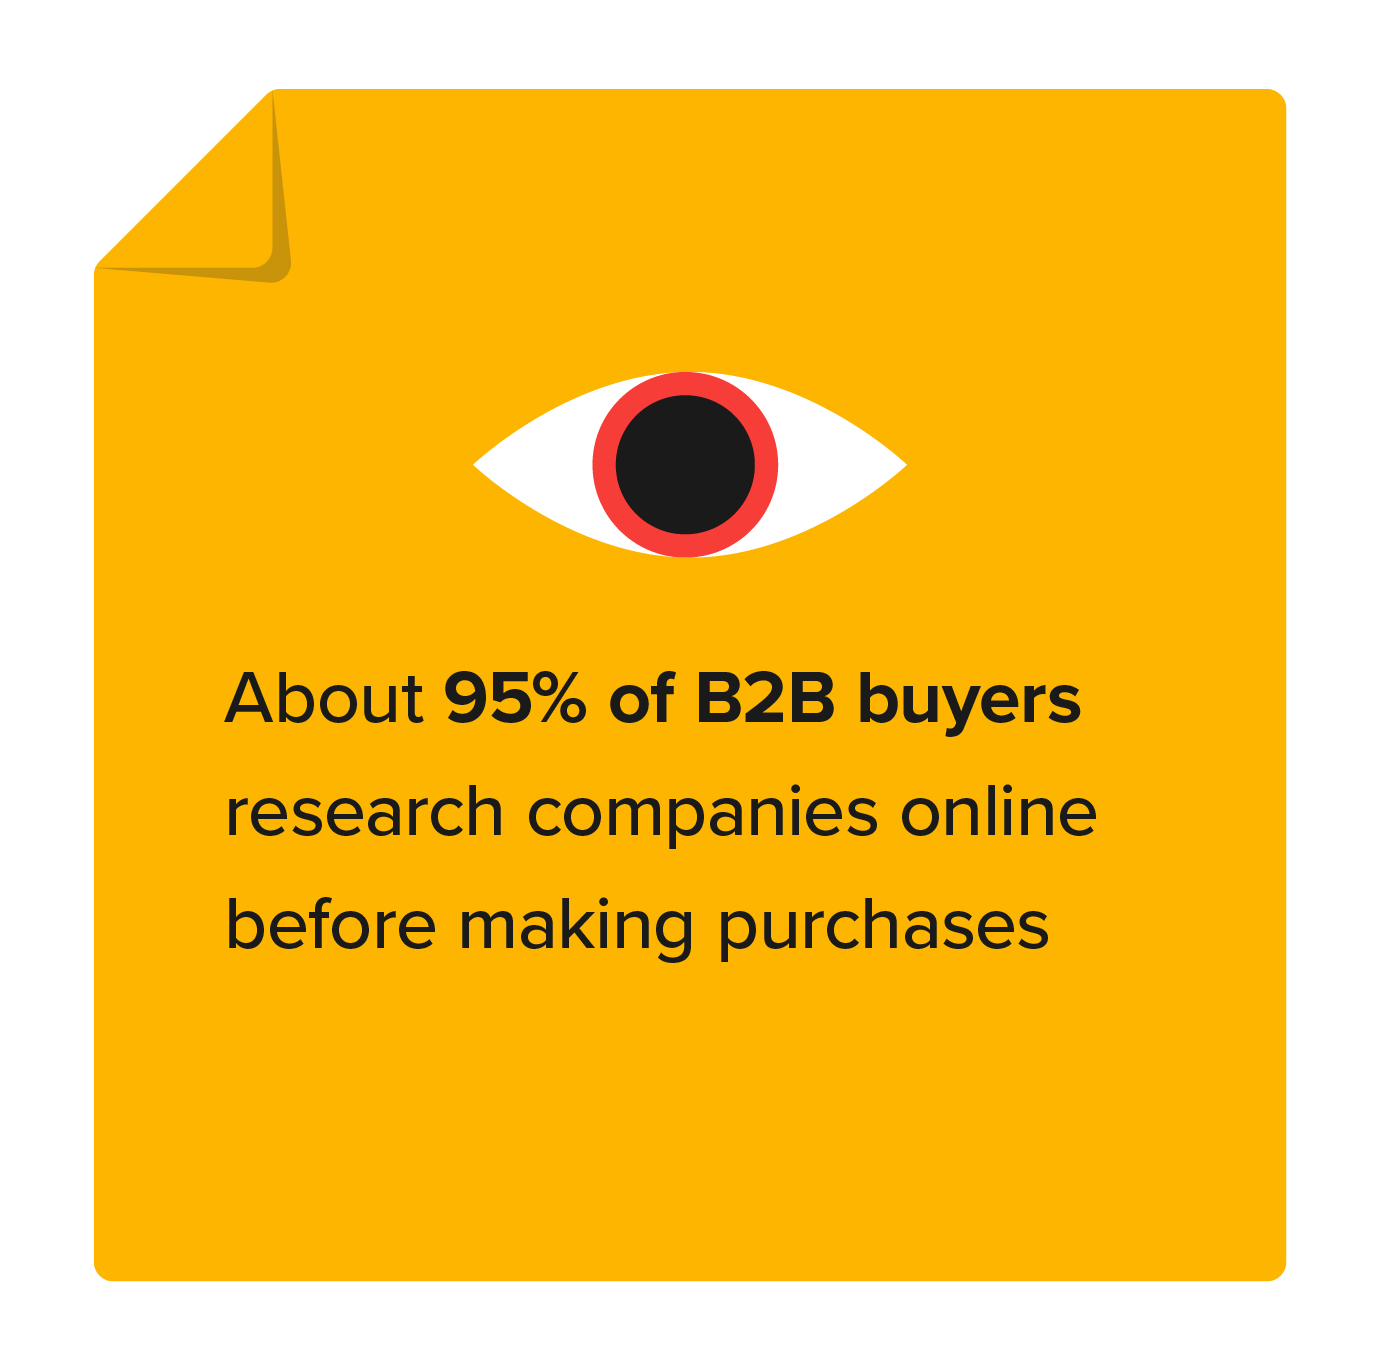 b2b-buyers-research-products-services-online.jpg